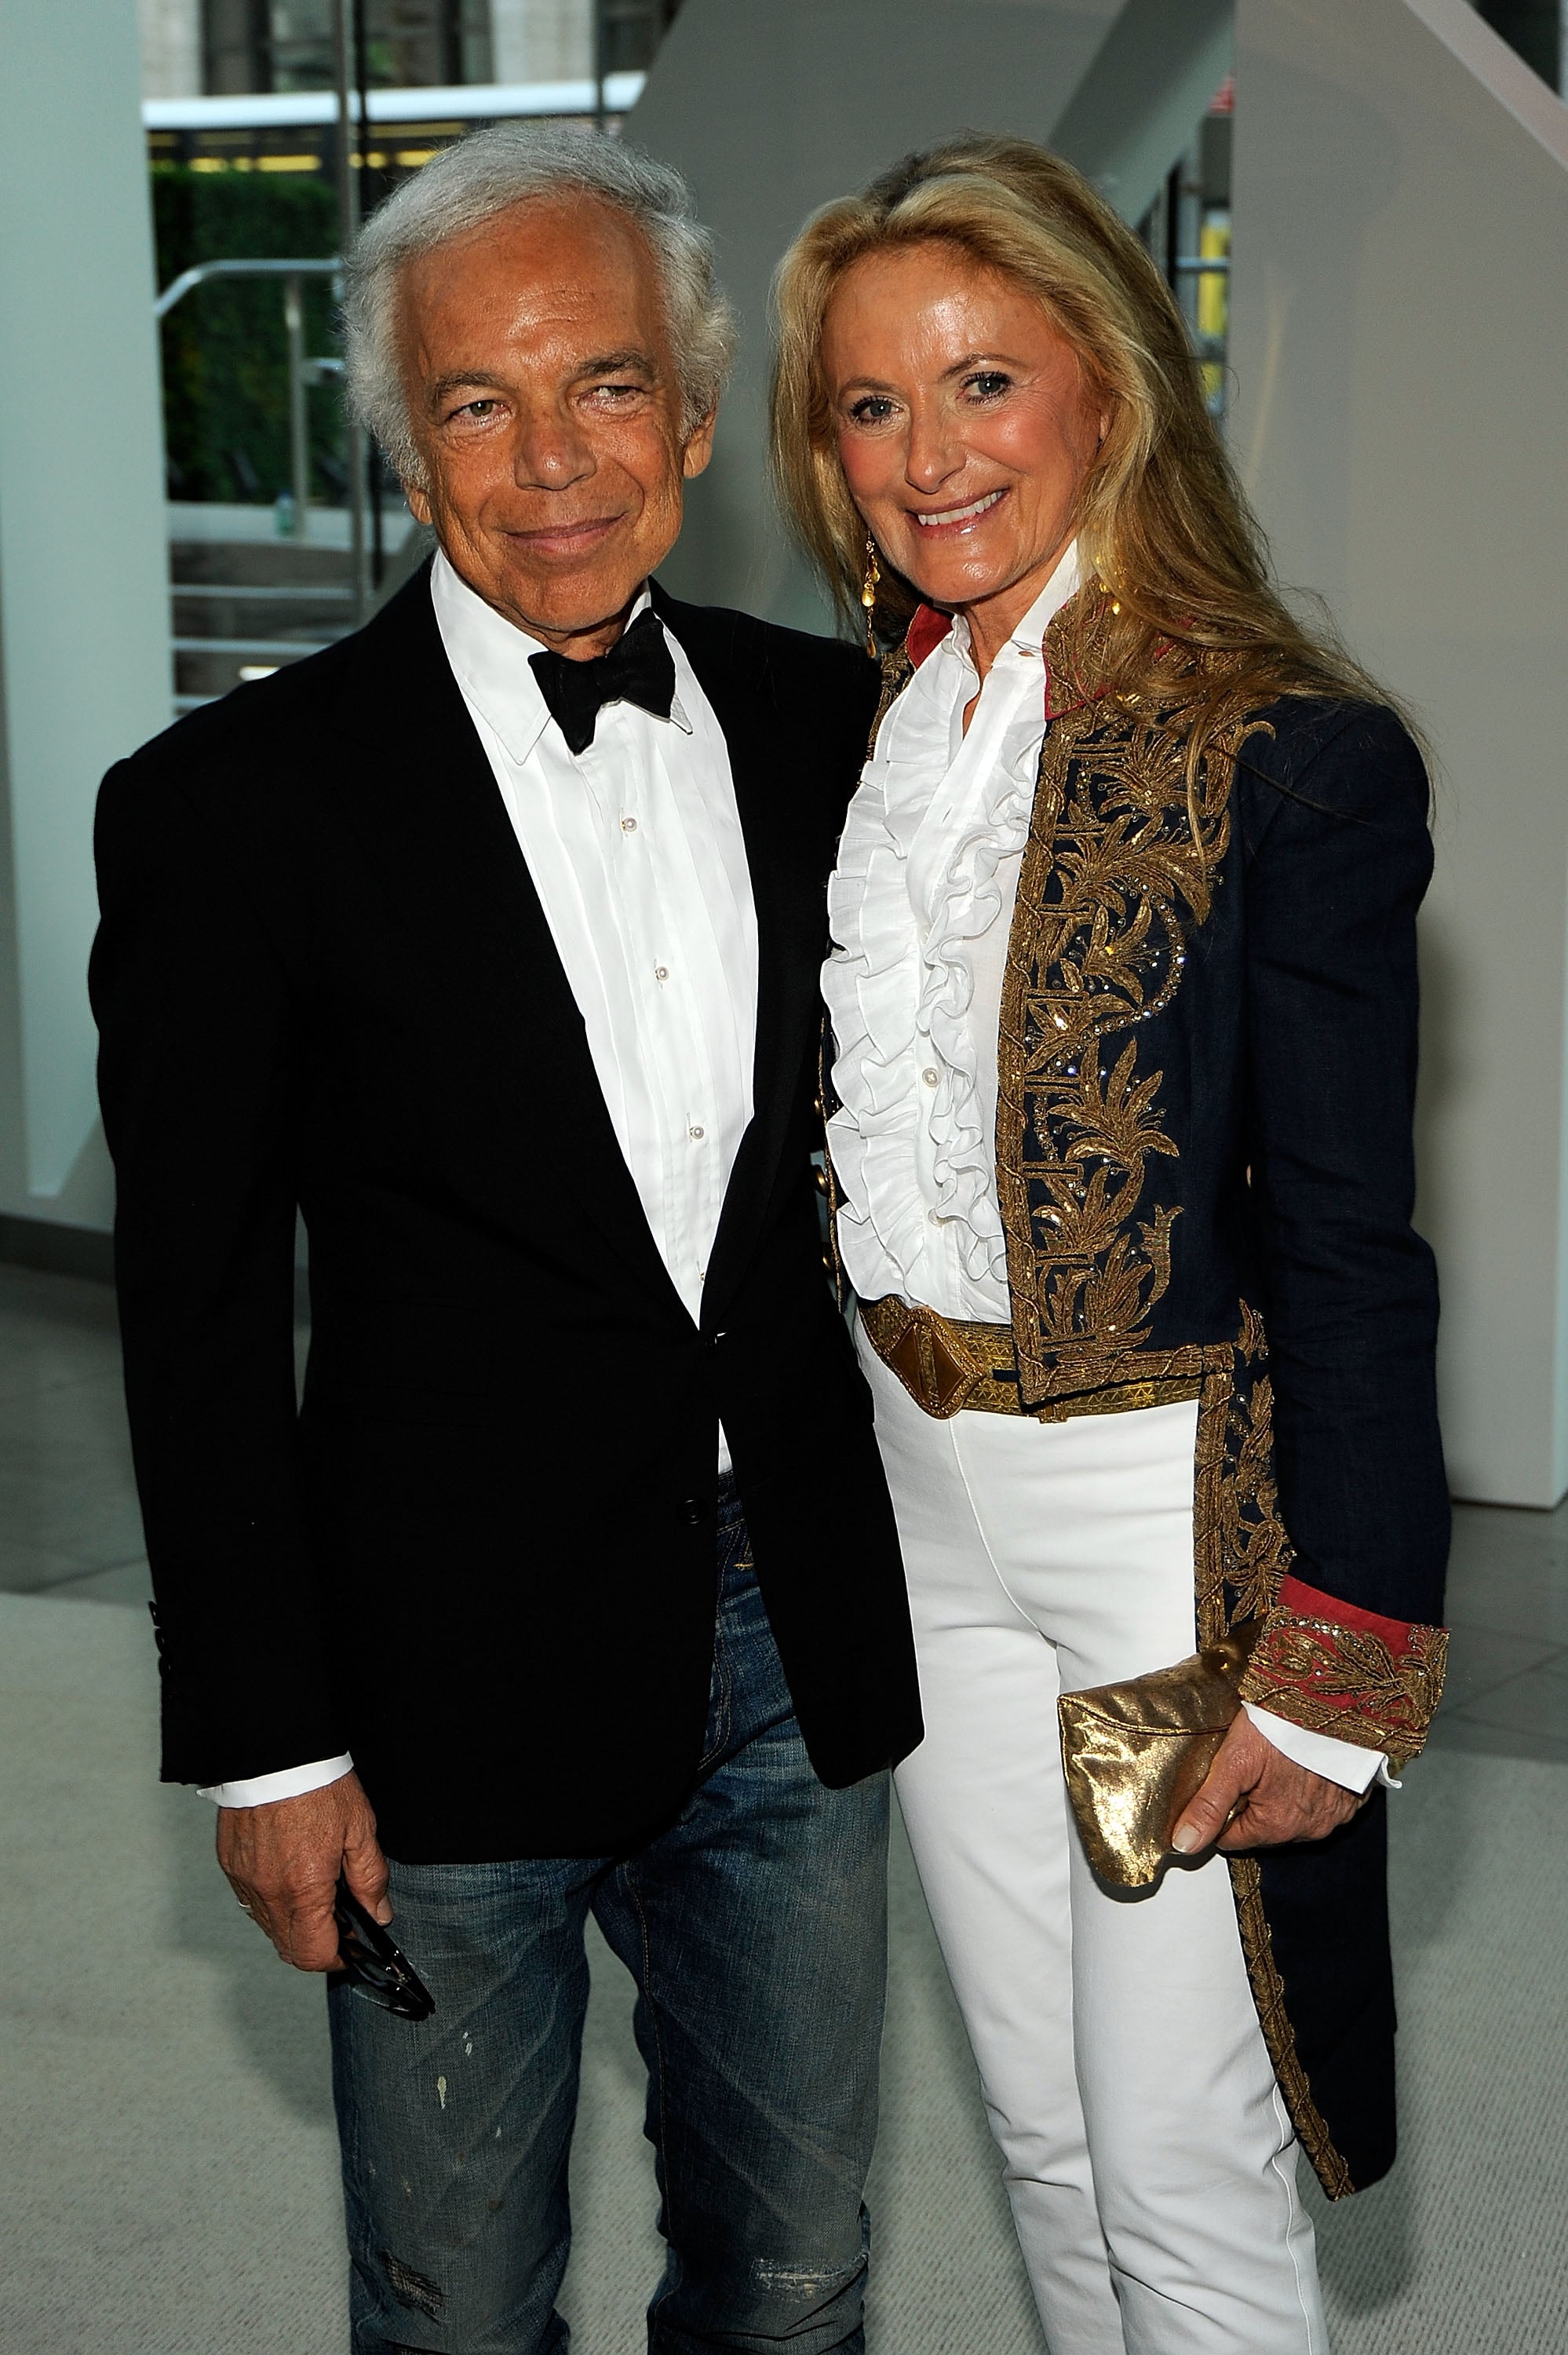 Ralph Lauren and his wife Ricky Low-Beer | 2009 CFDA Awards: The ...